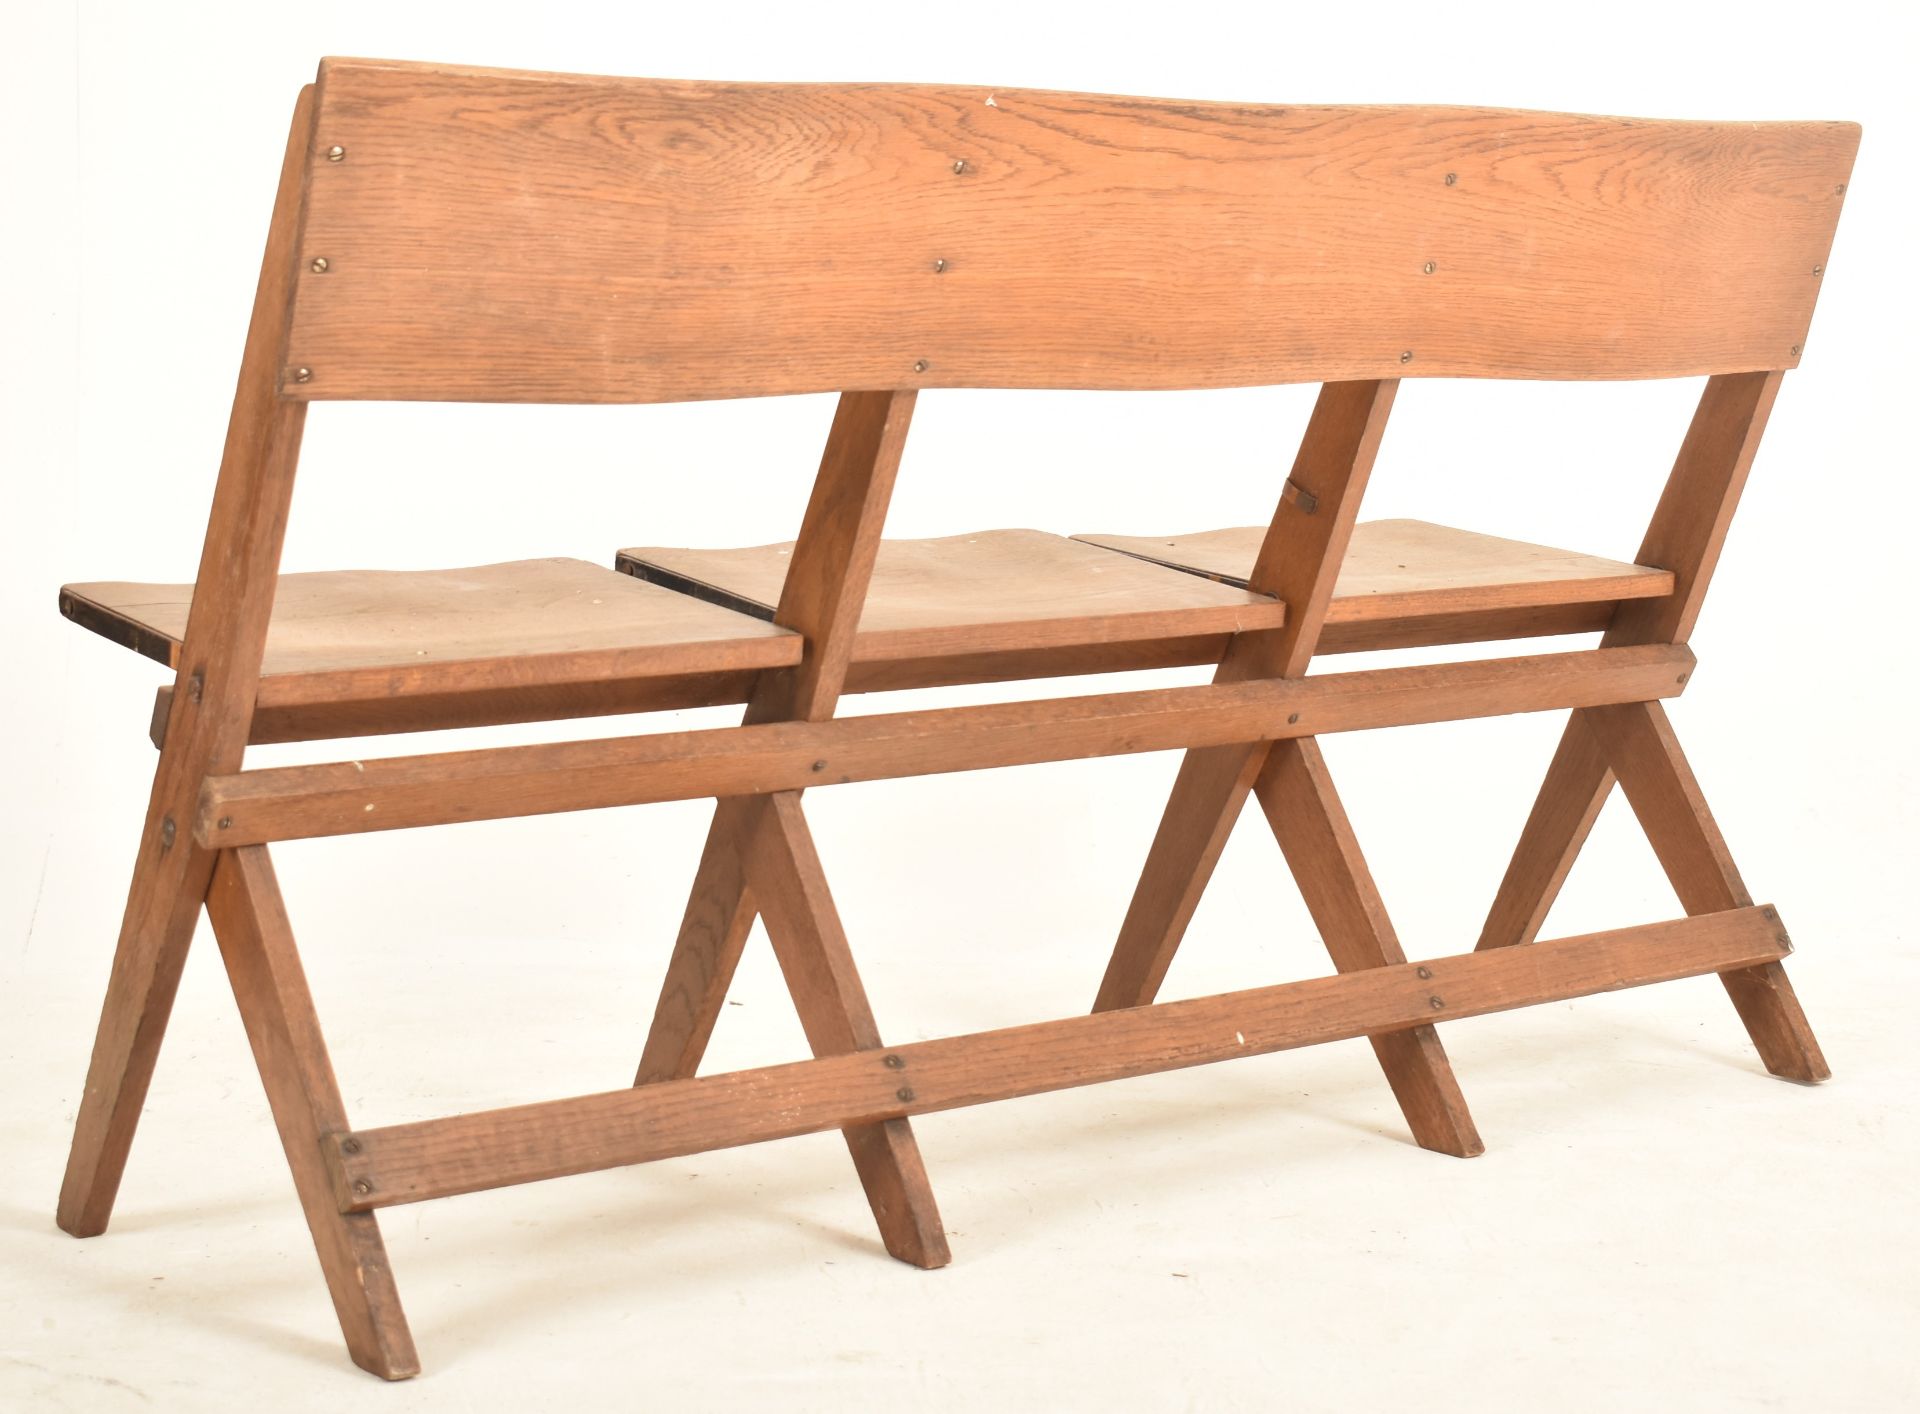 EARLY 20TH CENTURY 1920S ELM & OAK THEATRE THREE SEAT BENCH - Image 5 of 5